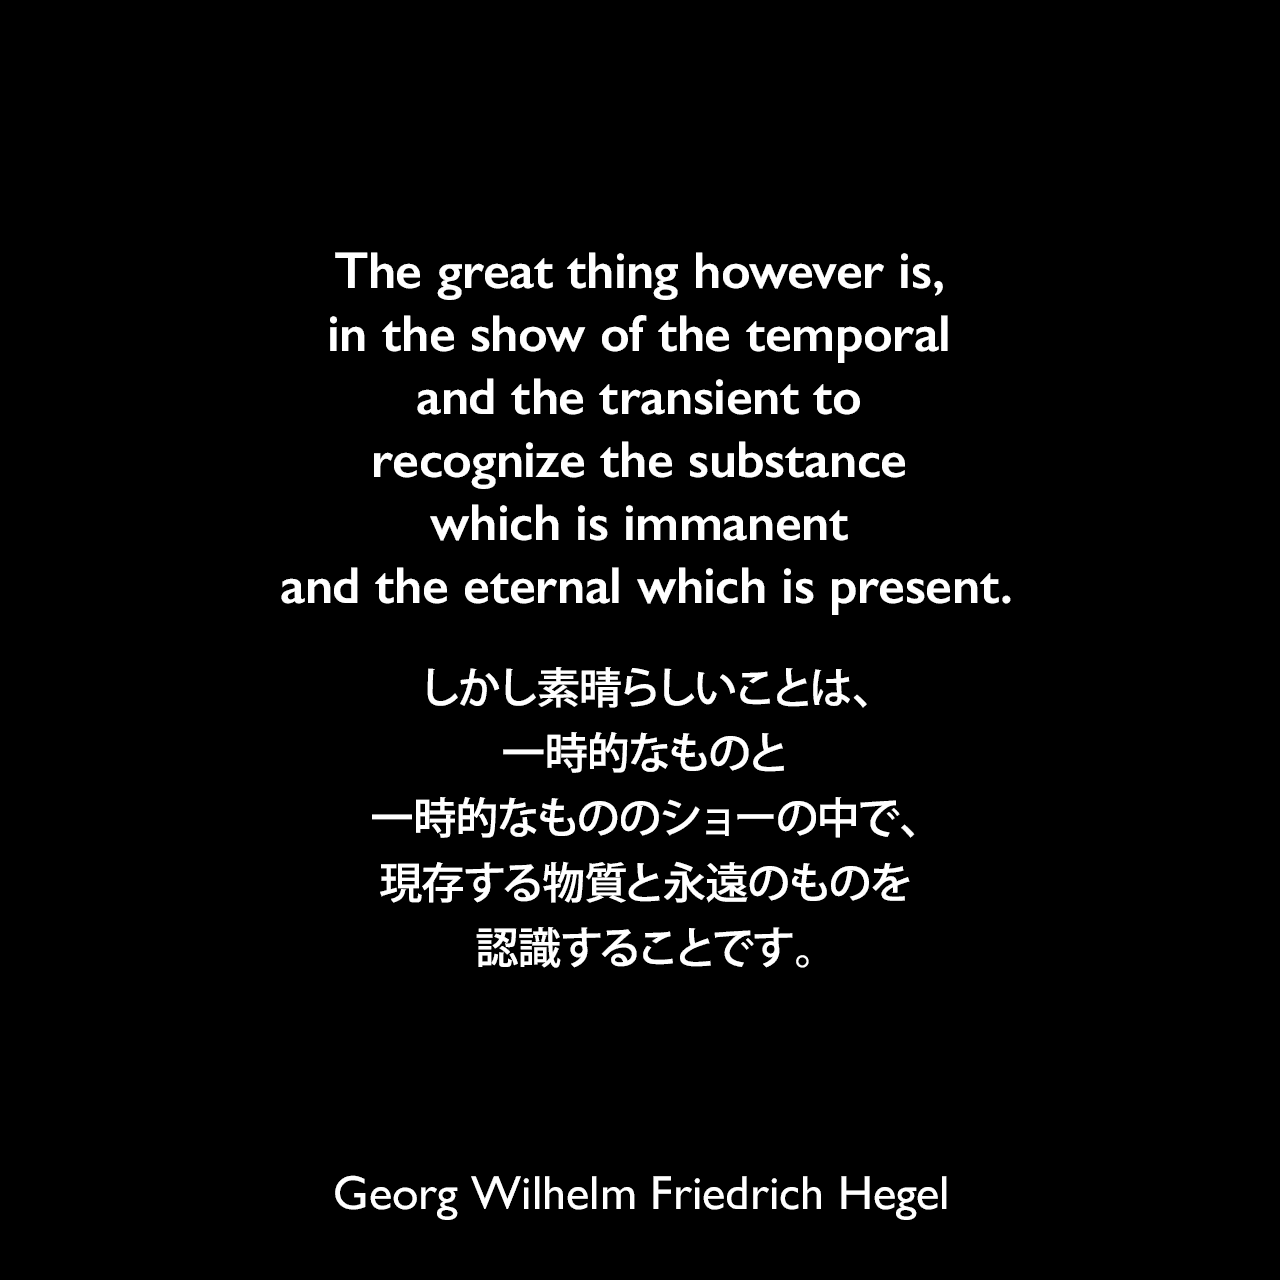 The great thing however is, in the show of the temporal and the transient to recognize the substance which is immanent and the eternal which is present.しかし素晴らしいことは、一時的なものと一時的なもののショーの中で、現存する物質と永遠のものを認識することです。Georg Wilhelm Friedrich Hegel